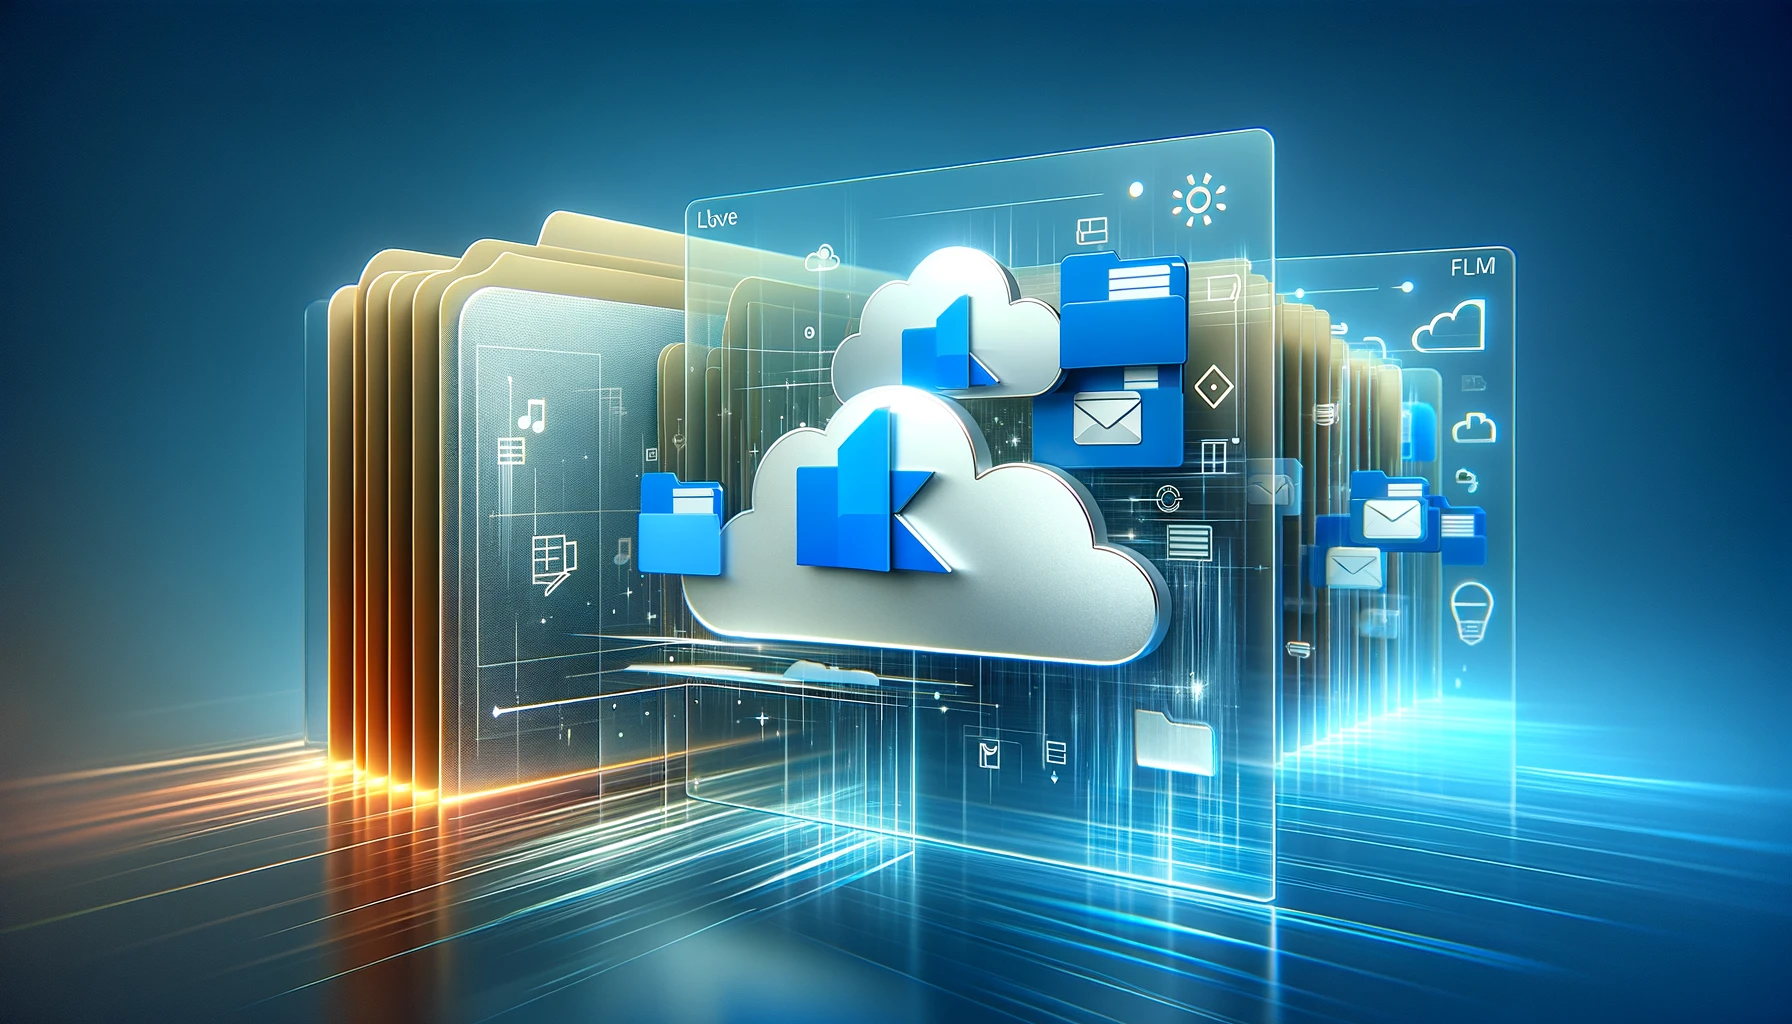 How to Add OneDrive to File Explorer: Streamline Your Cloud Storage Integration